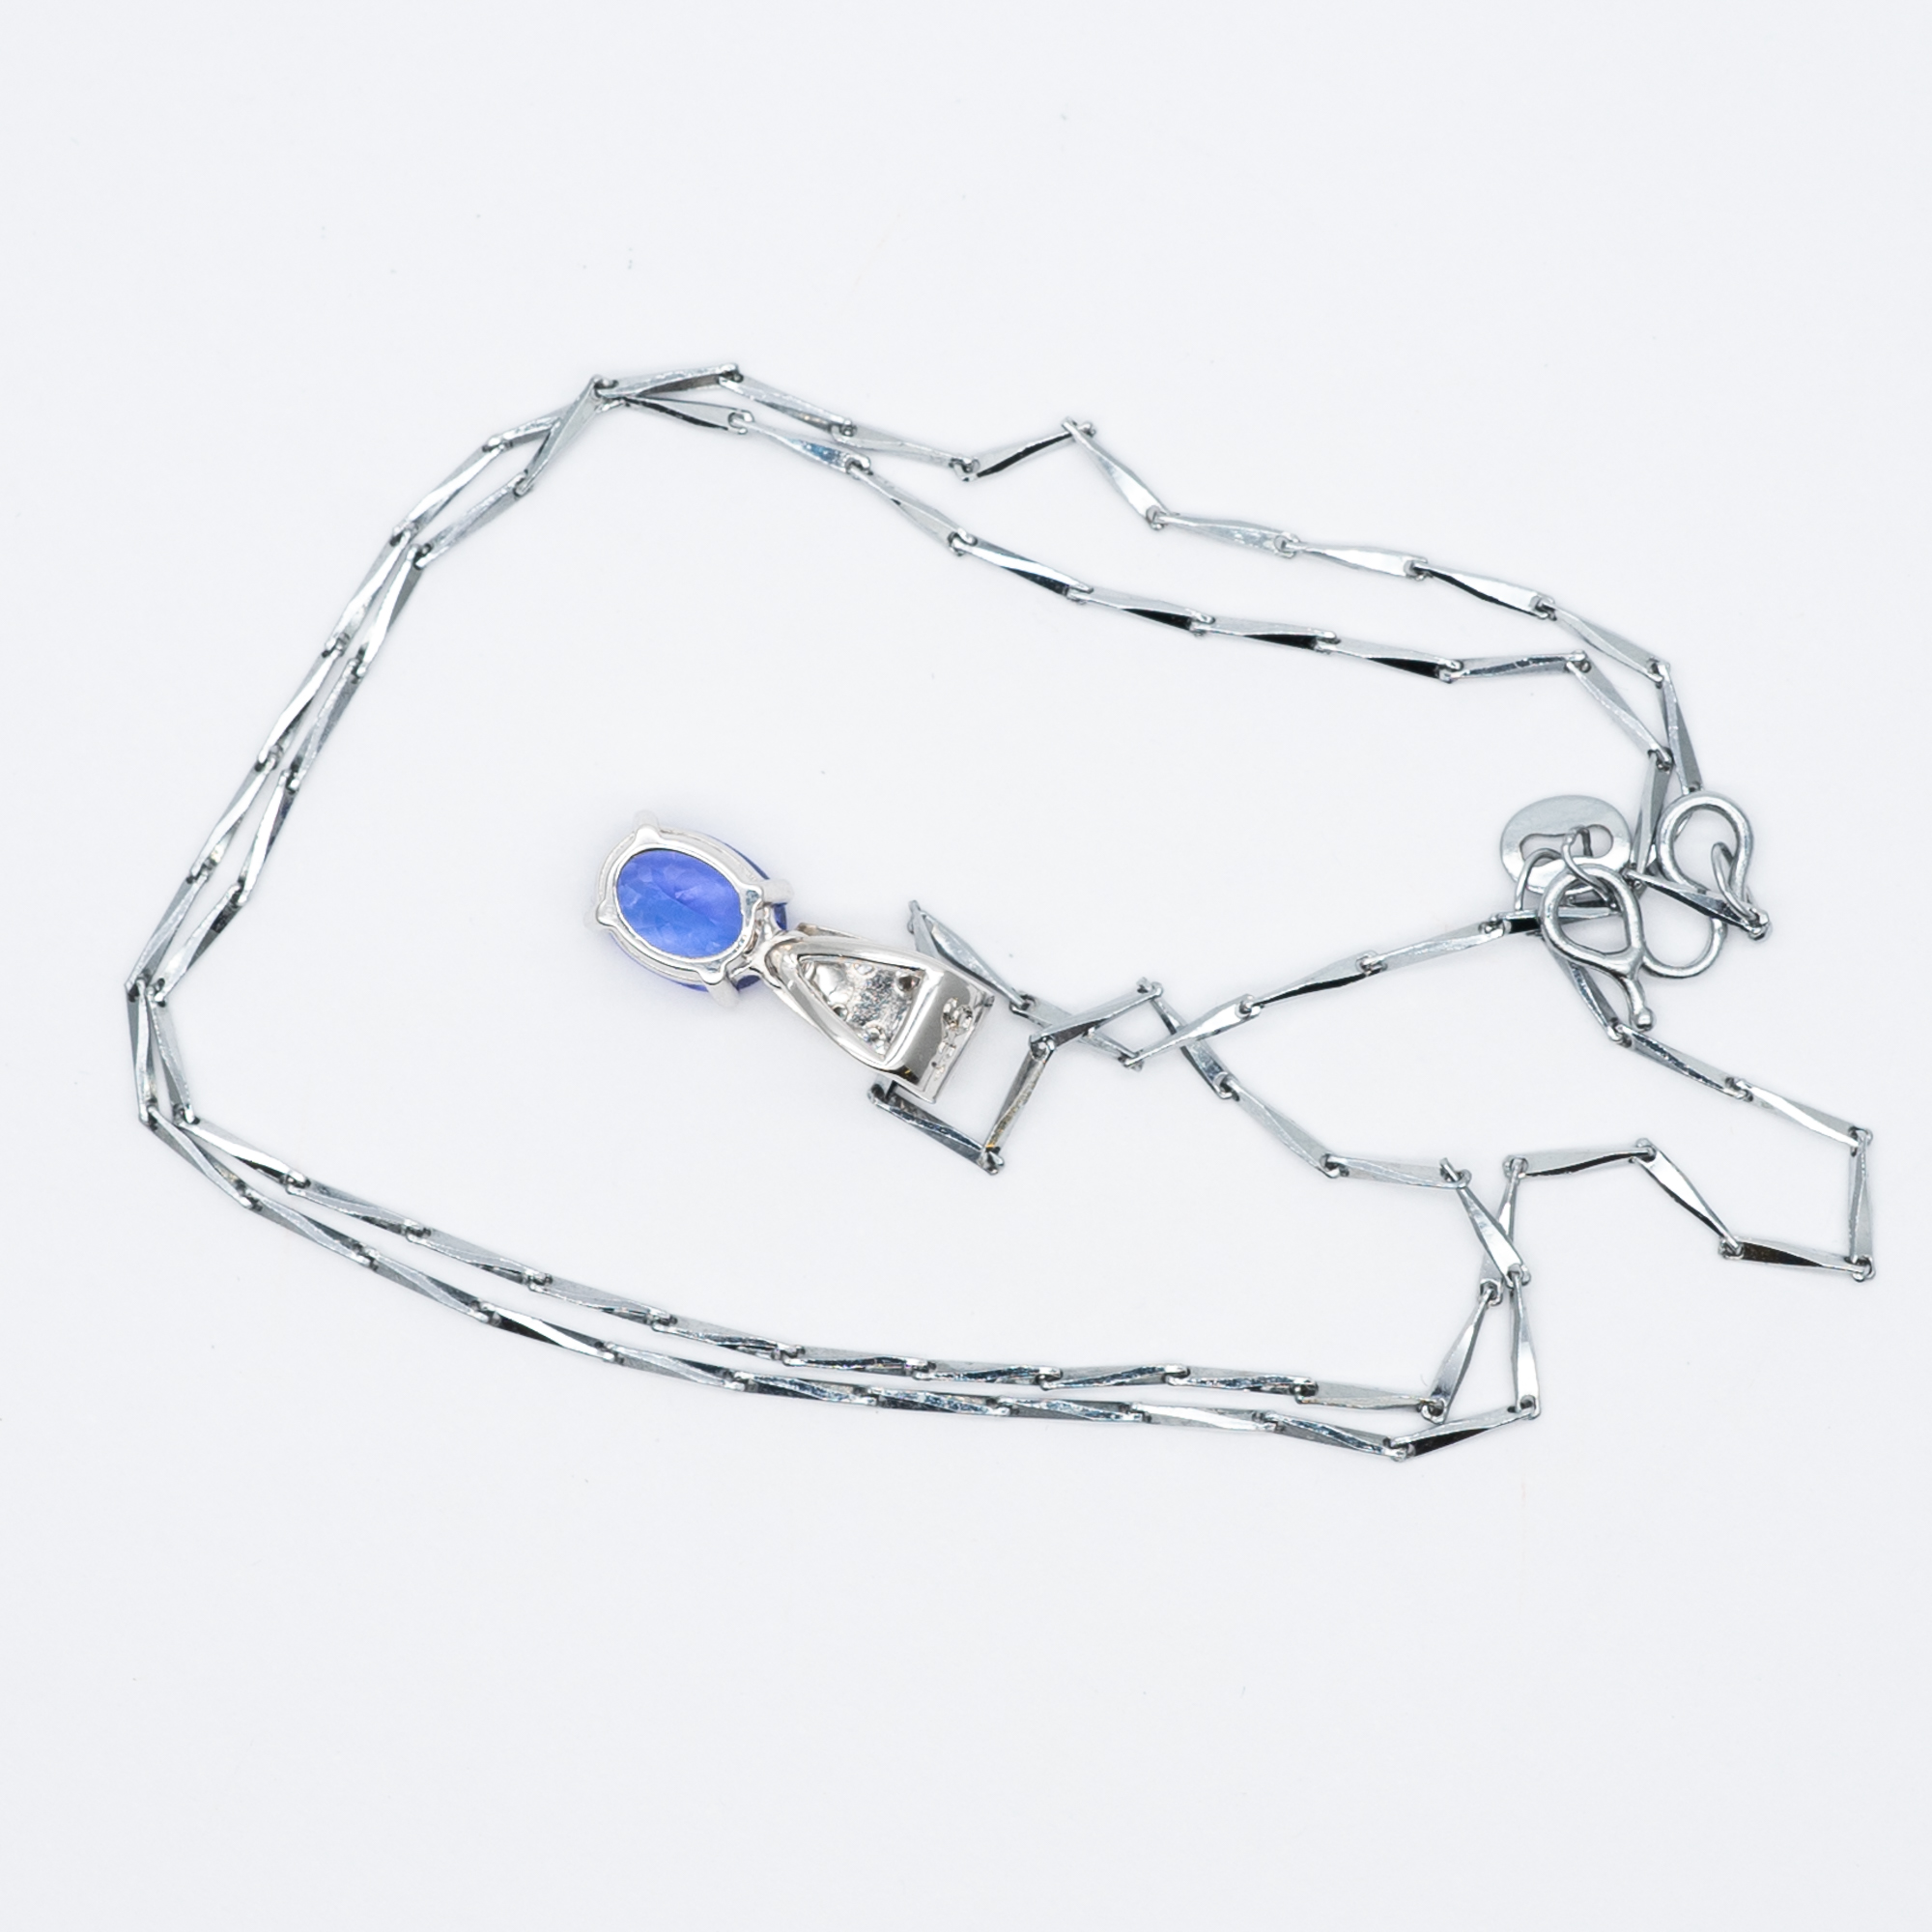 A 9ct white gold tanzanite and diamond pendant and chain - Image 3 of 4